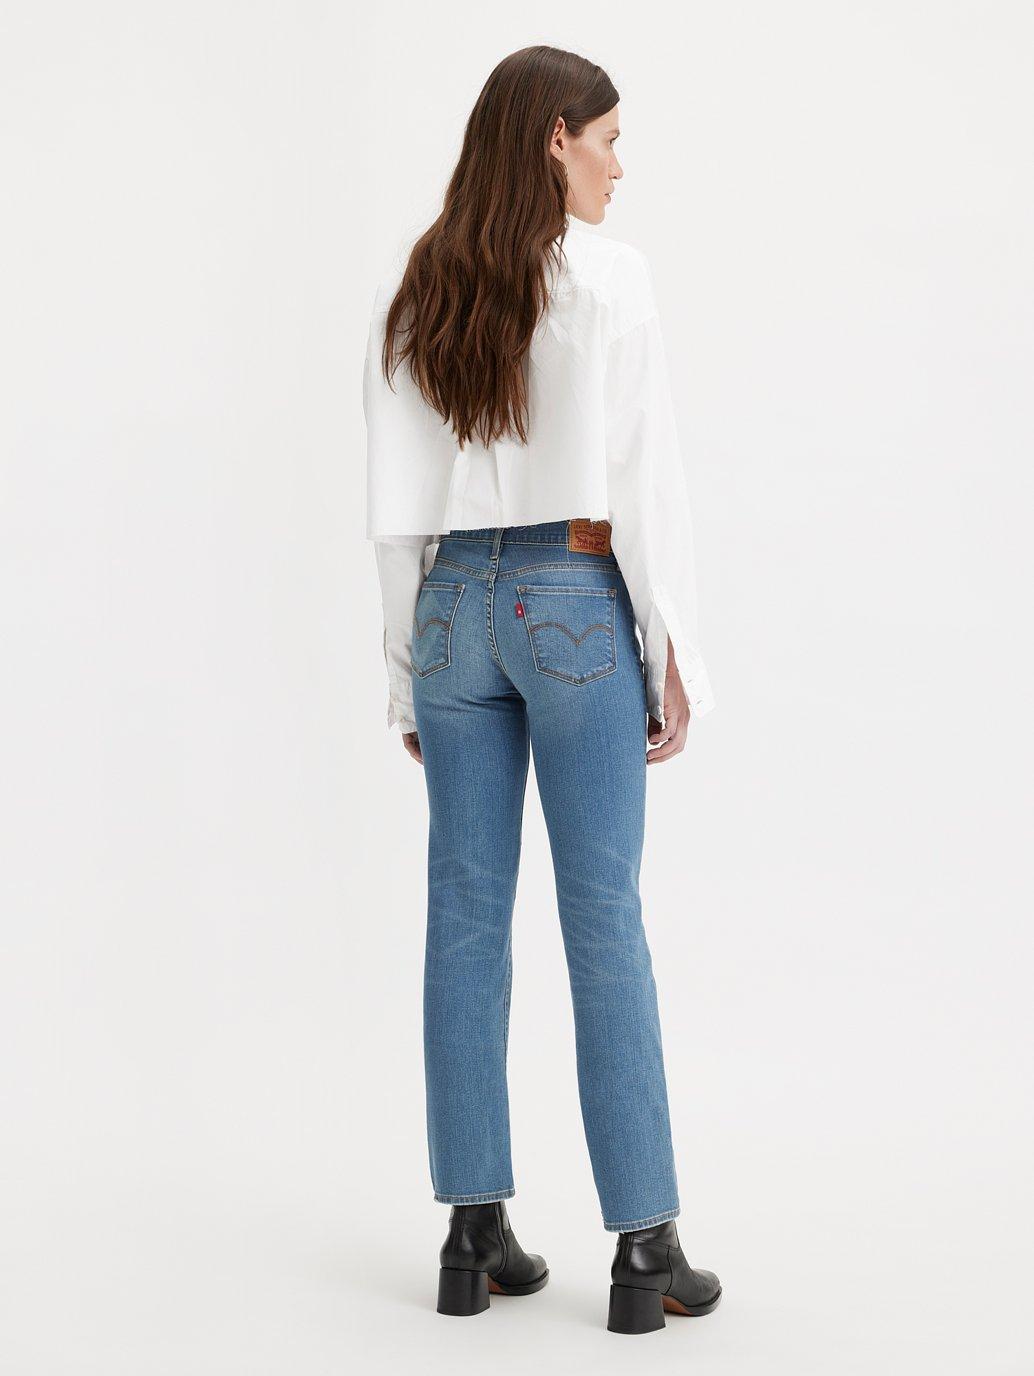 Buy Levi's® Women's 314 Shaping Straight Jeans | Levi’s Official Online ...